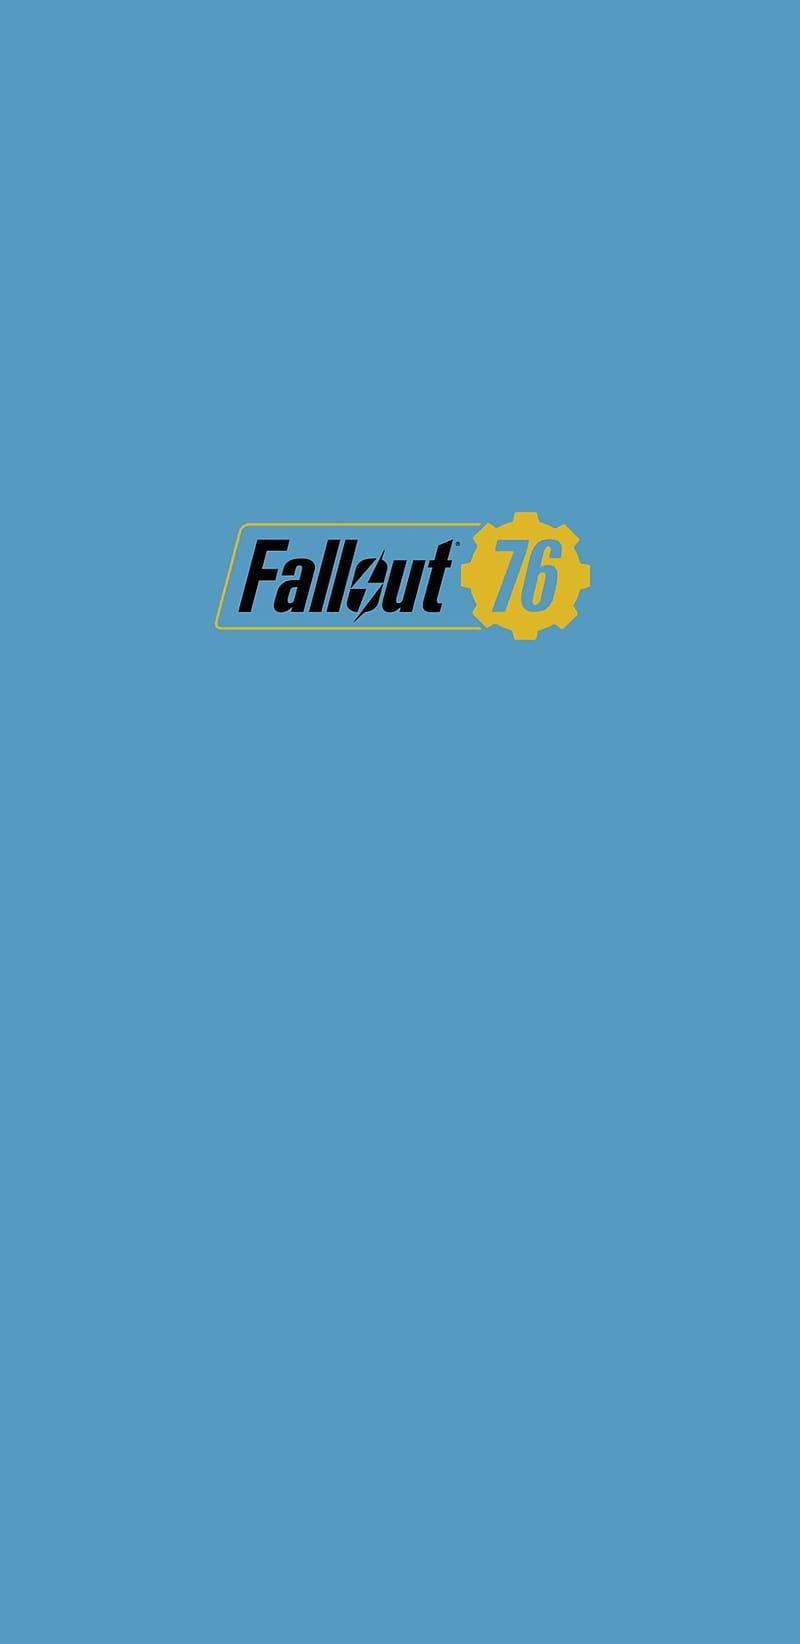 Fallout 76 Clean 2, clean, fallout, fallout 76, game, pip, steamroom, technology, video game, video games, HD phone wallpaper